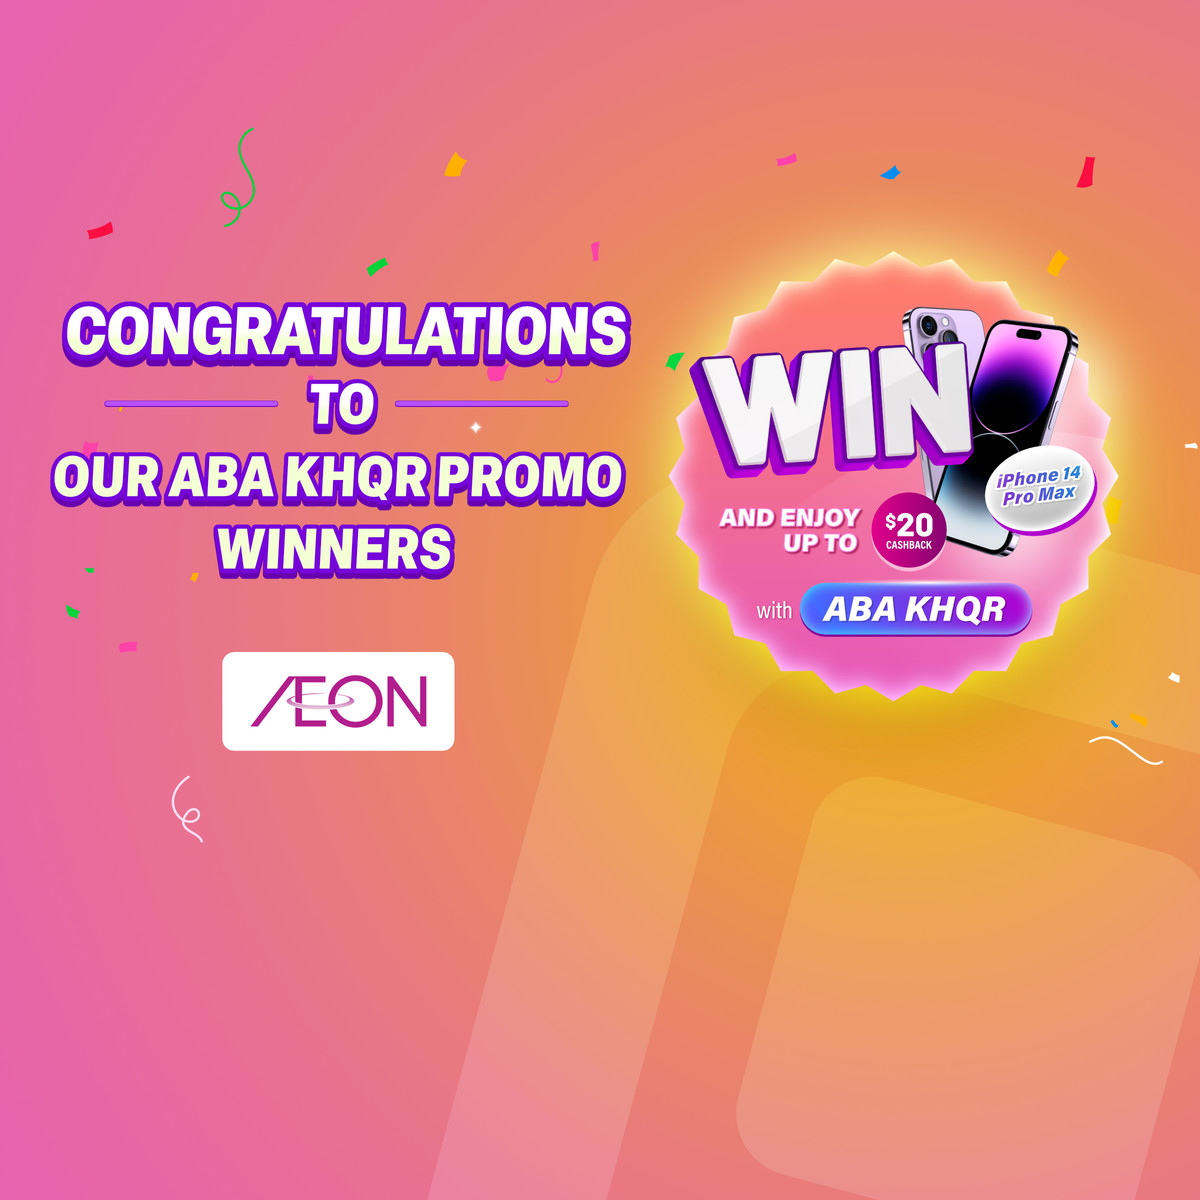 Congratulations to the winners of “Get cashback and win iPhone 14 Pro Max at AEON Cambodia with ABA KHQR” promotion